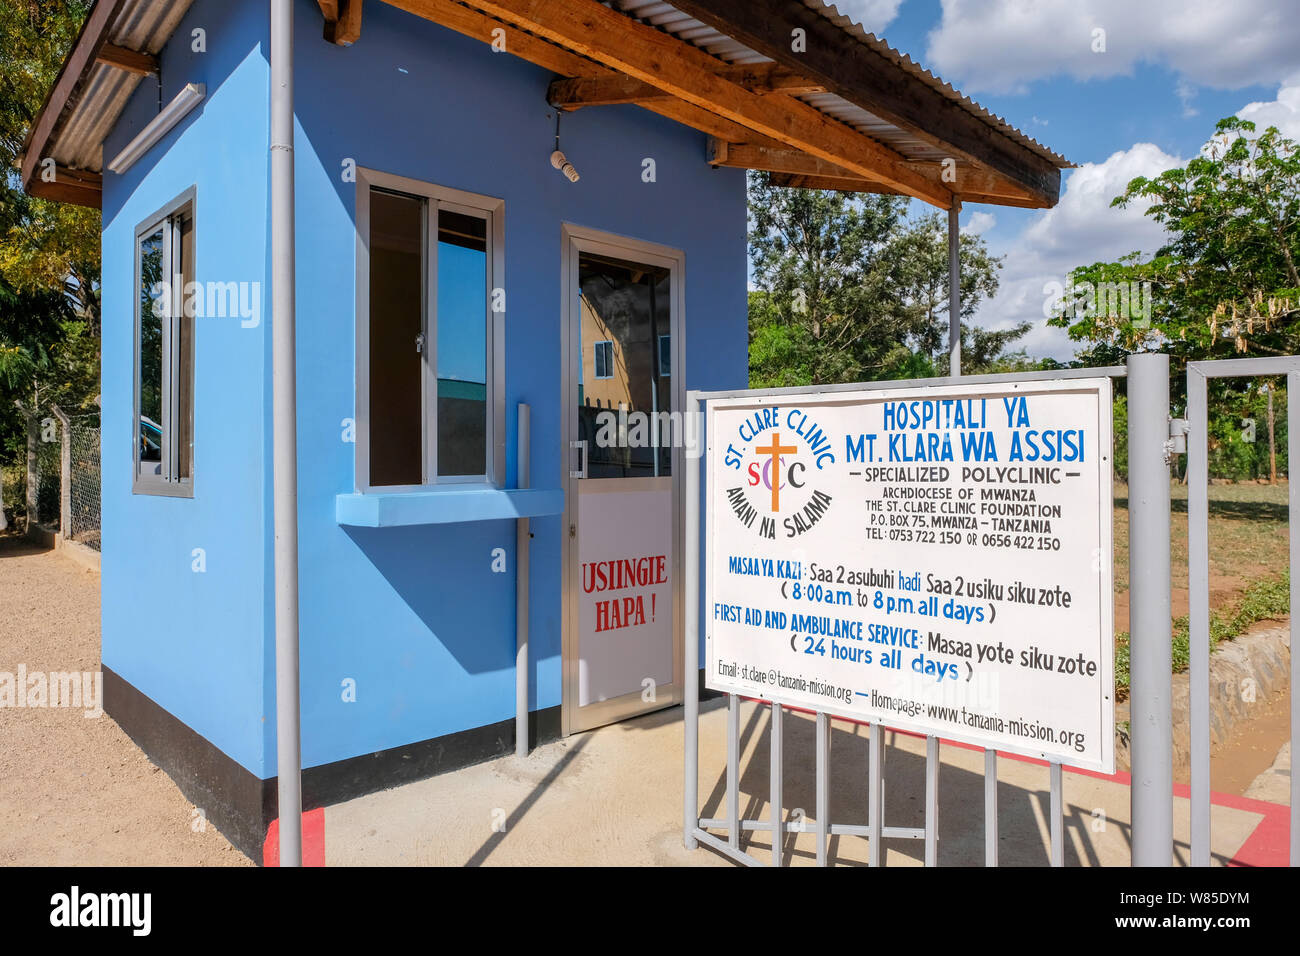 Entrance to the catholic St. Clare Clinic of the German missionary doctor Thomas Brei, in Mwanza, Tanzania, Africa Stock Photo